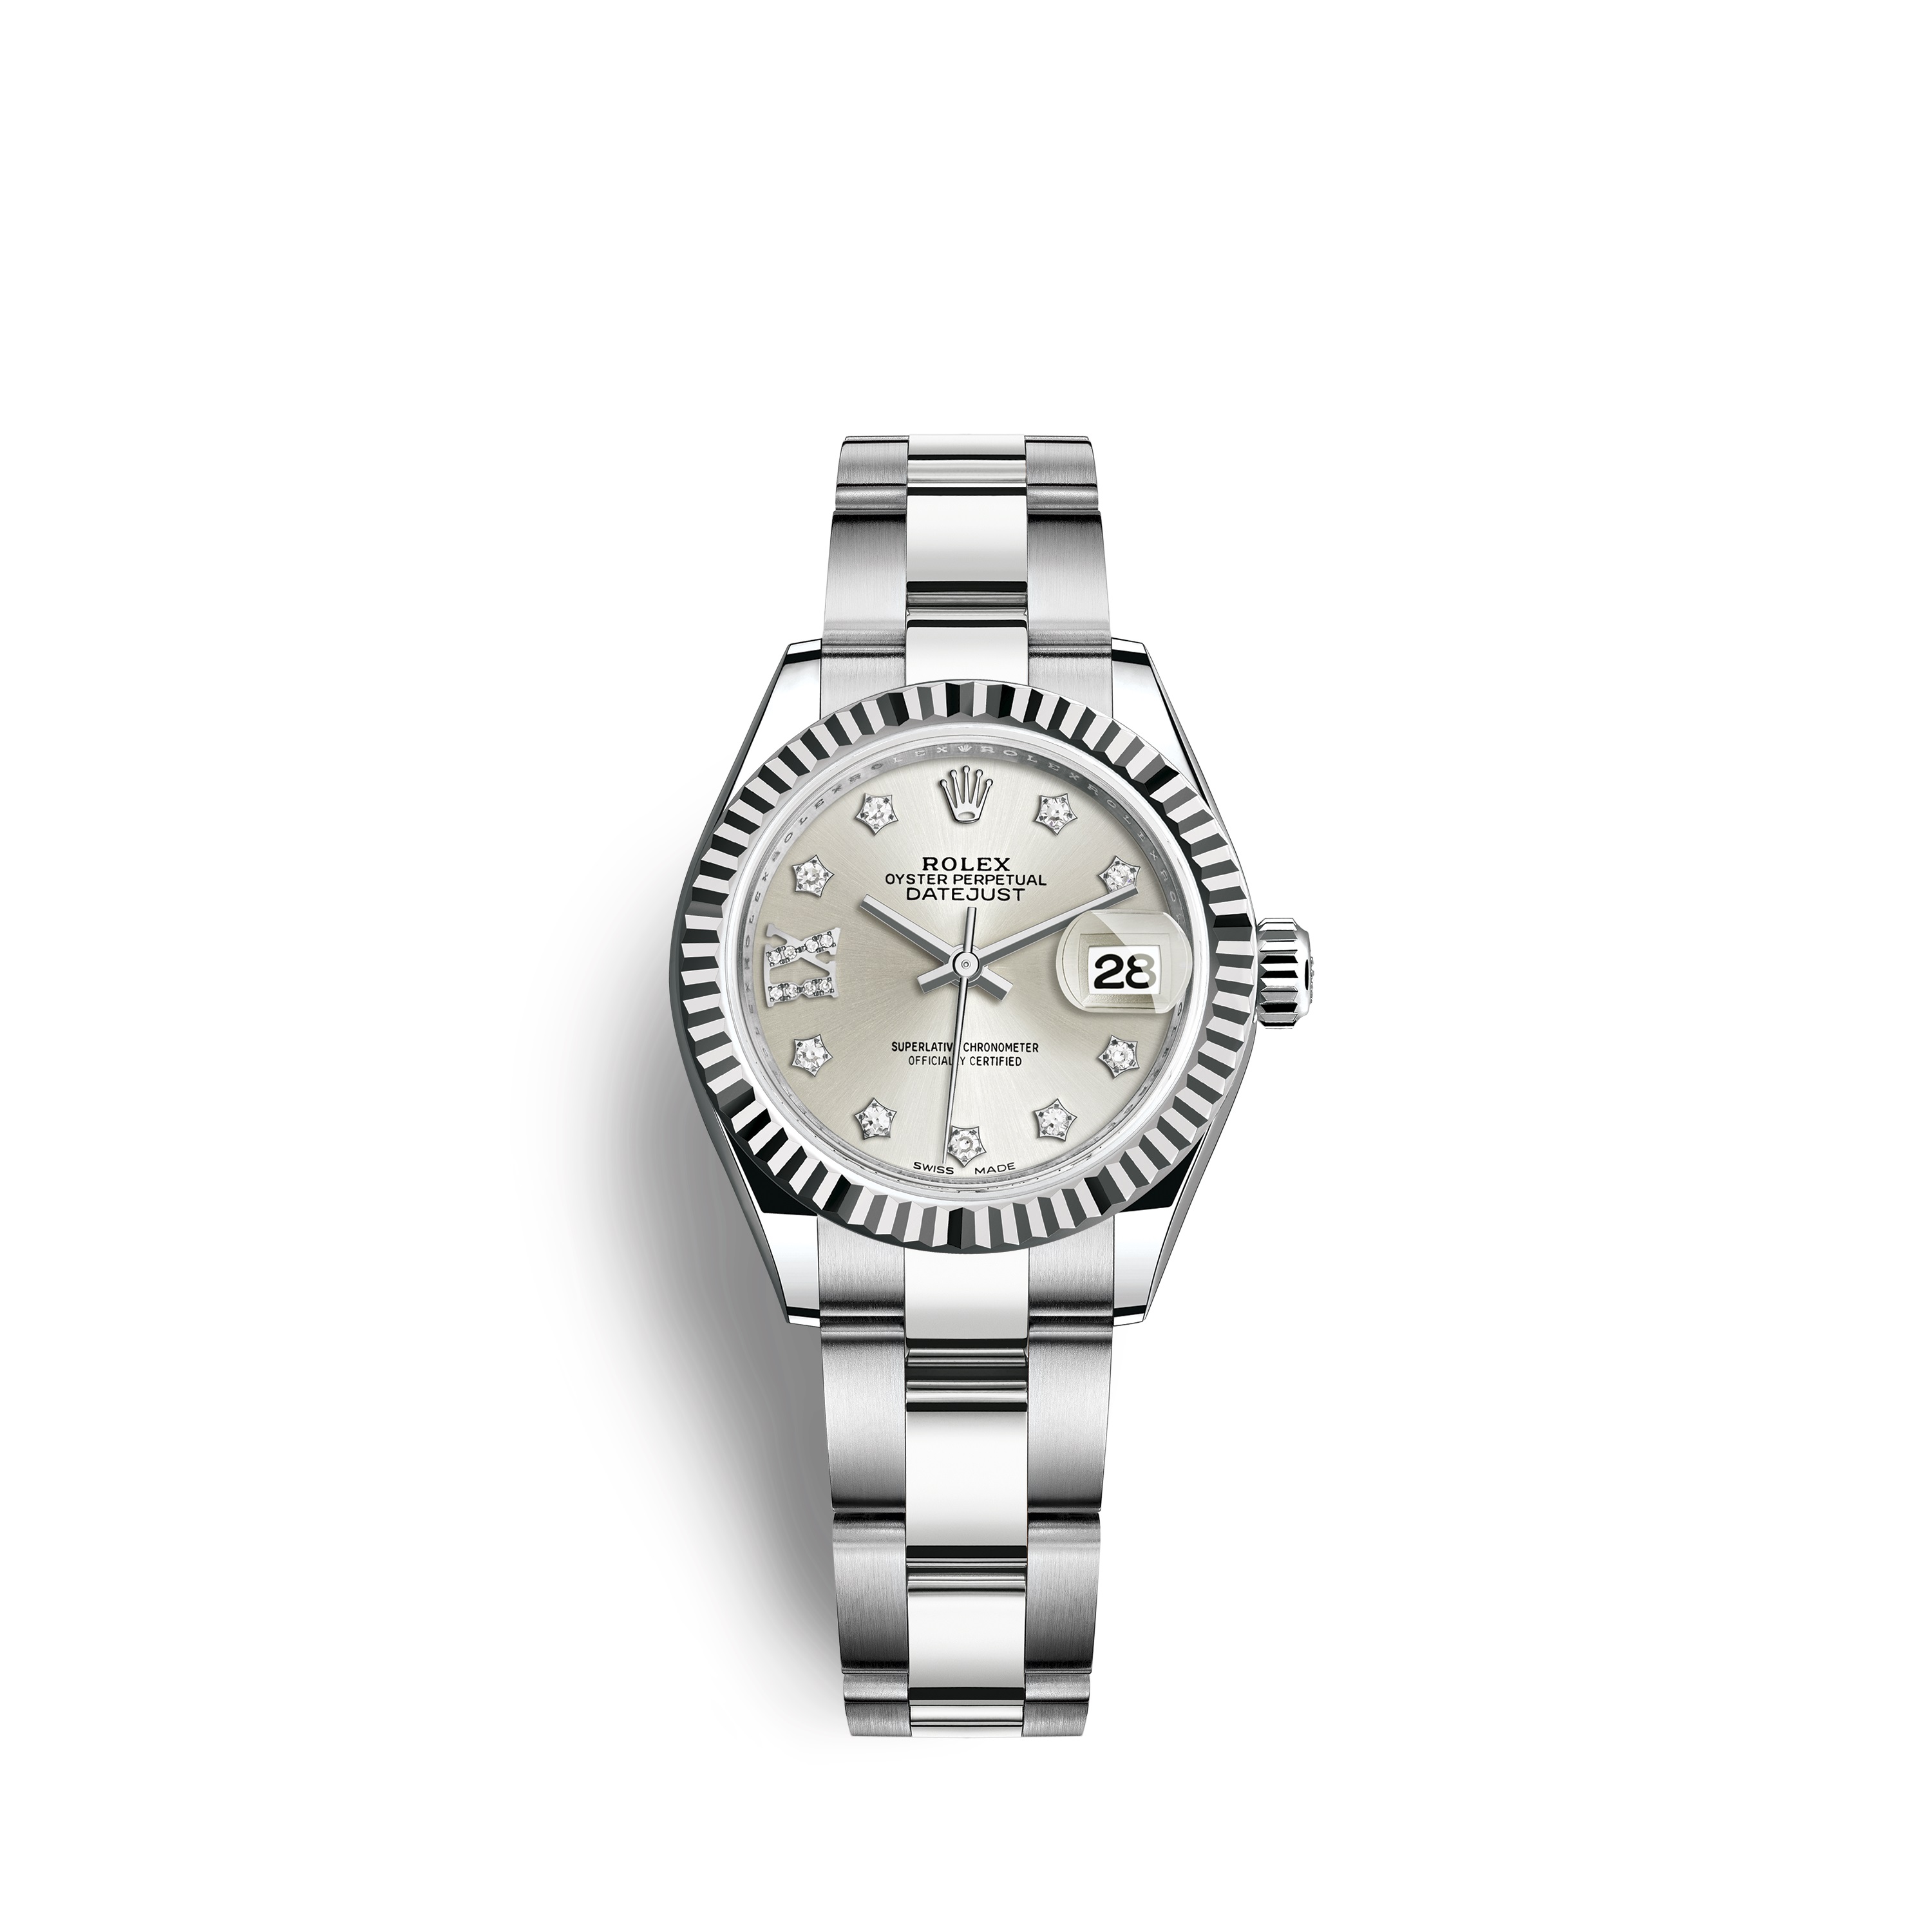 Lady-Datejust 28 279174 White Gold & Stainless Steel Watch (Silver Set with Diamonds) - Click Image to Close